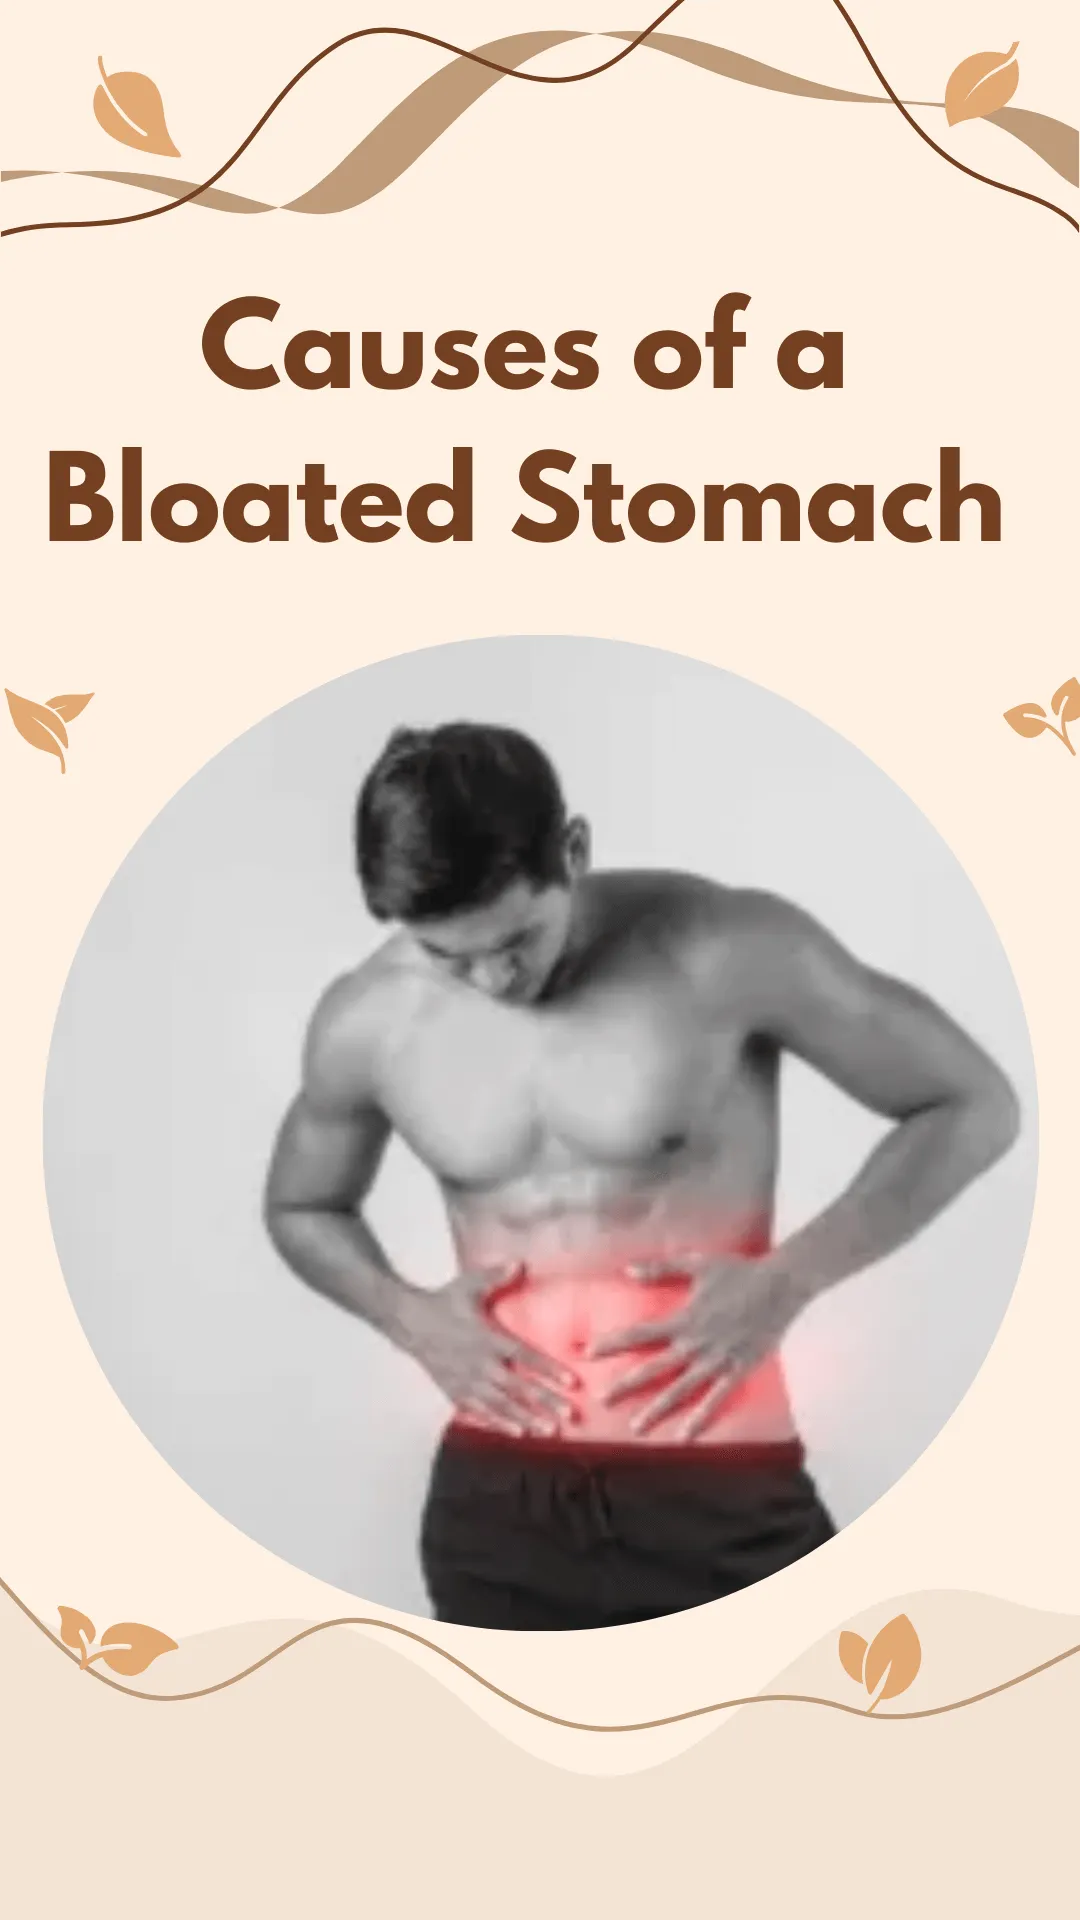 Causes of a Bloated Stomach